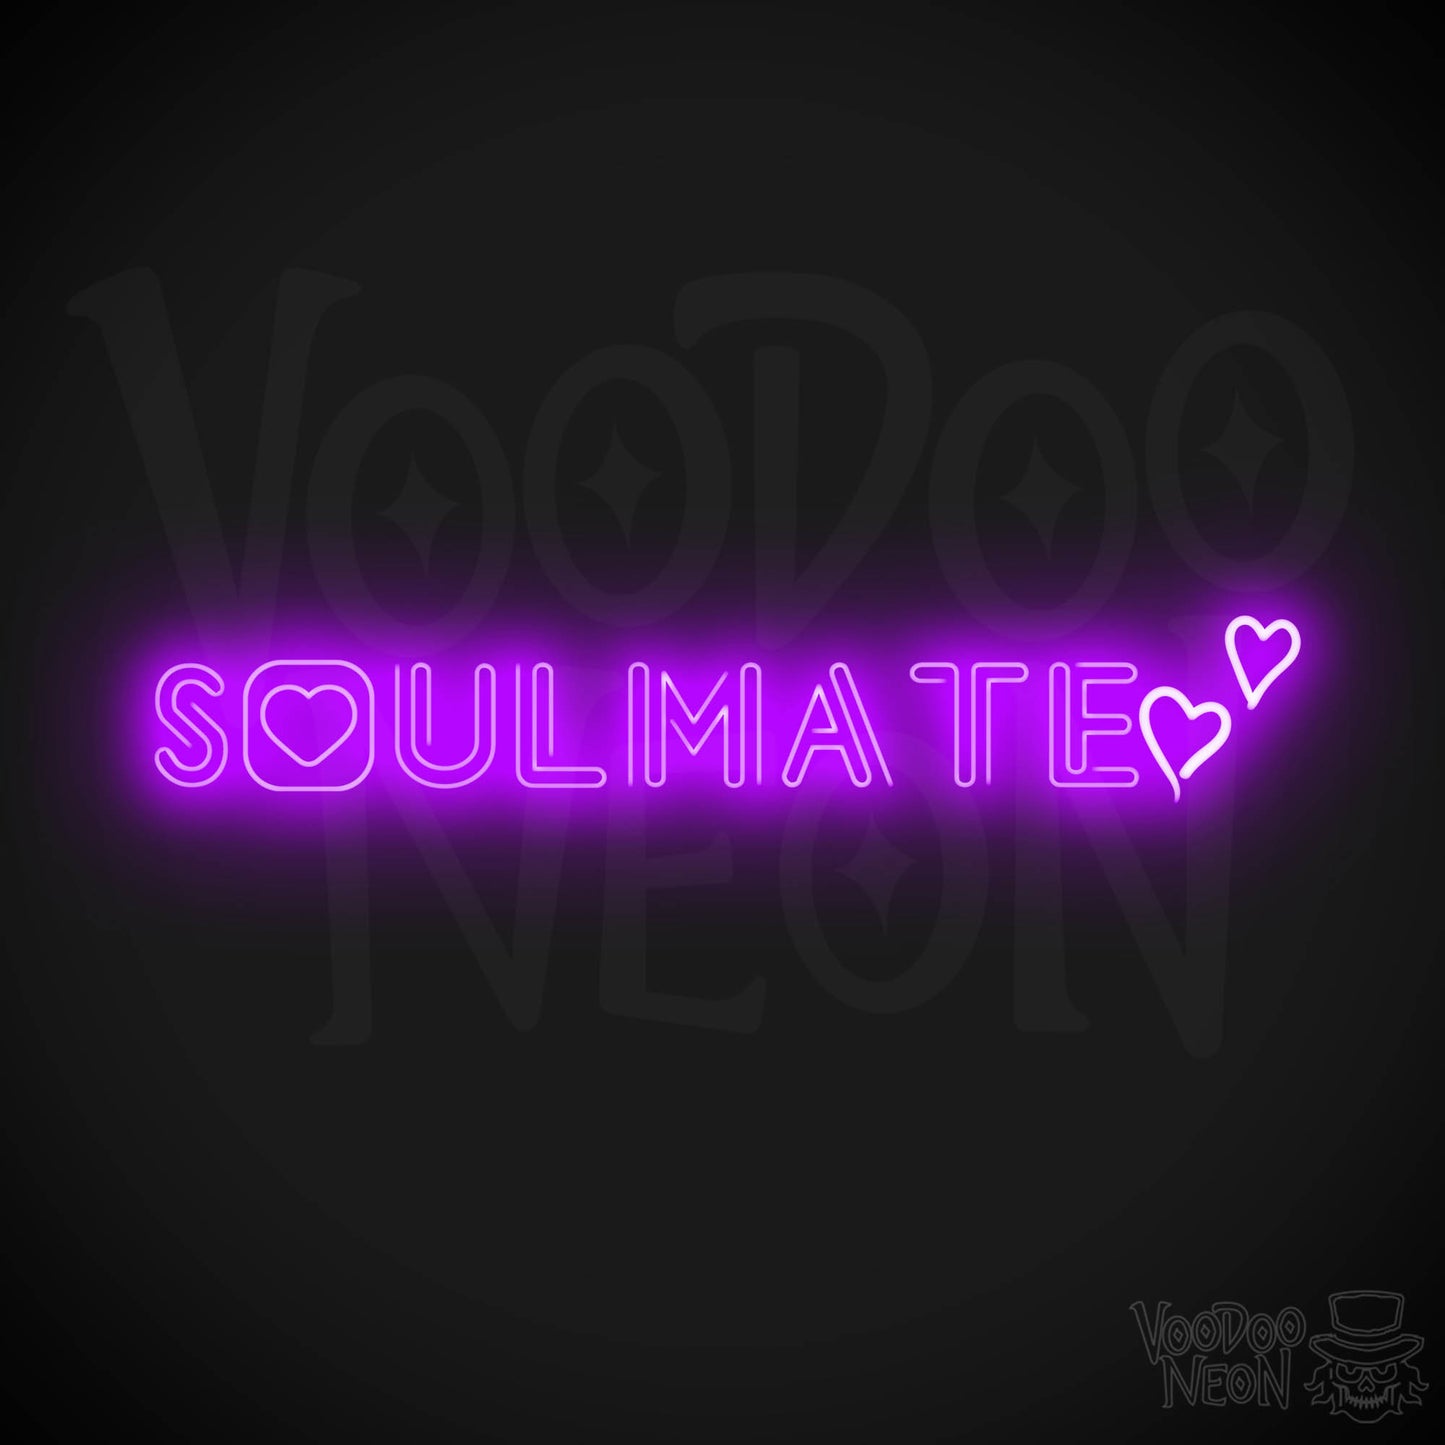 Soulmate Neon Sign - Neon Soulmate Sign - LED Neon Wall Art - Color Purple